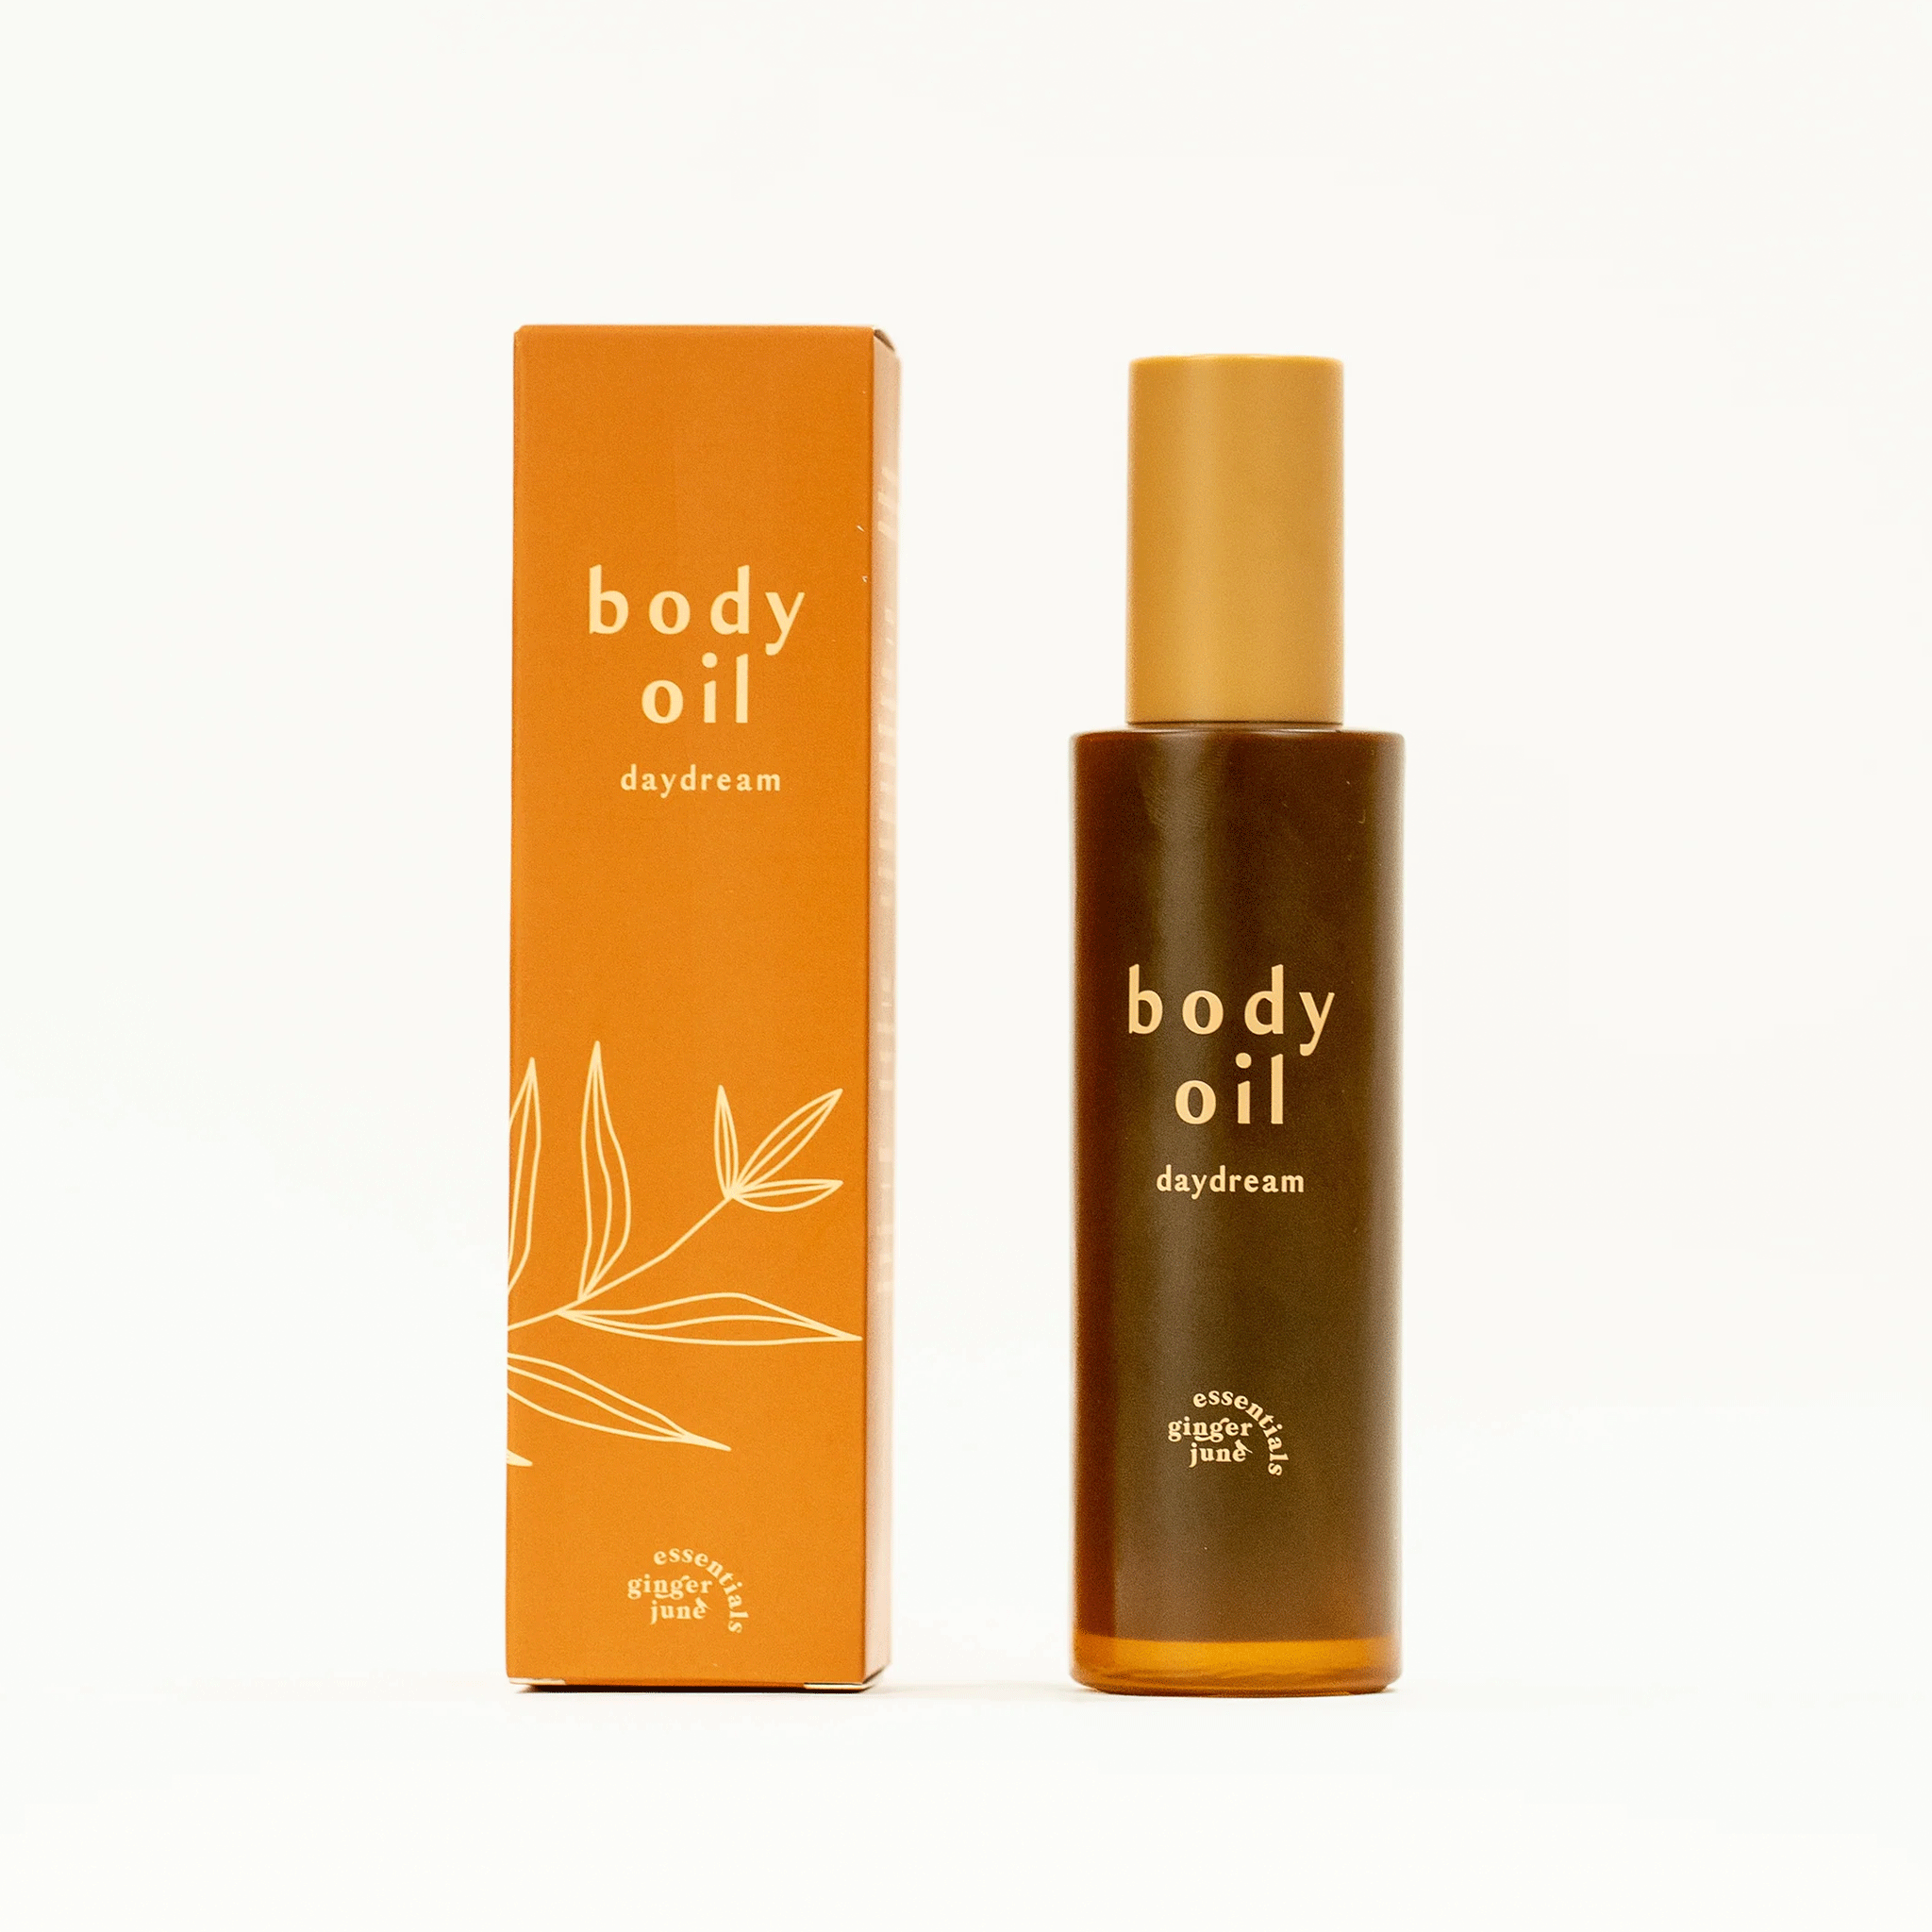 On a white background is a bottle of body oil with a tan cap and an orange box packaging along with text on the front that reads, &quot;body oil daydream&quot;. 